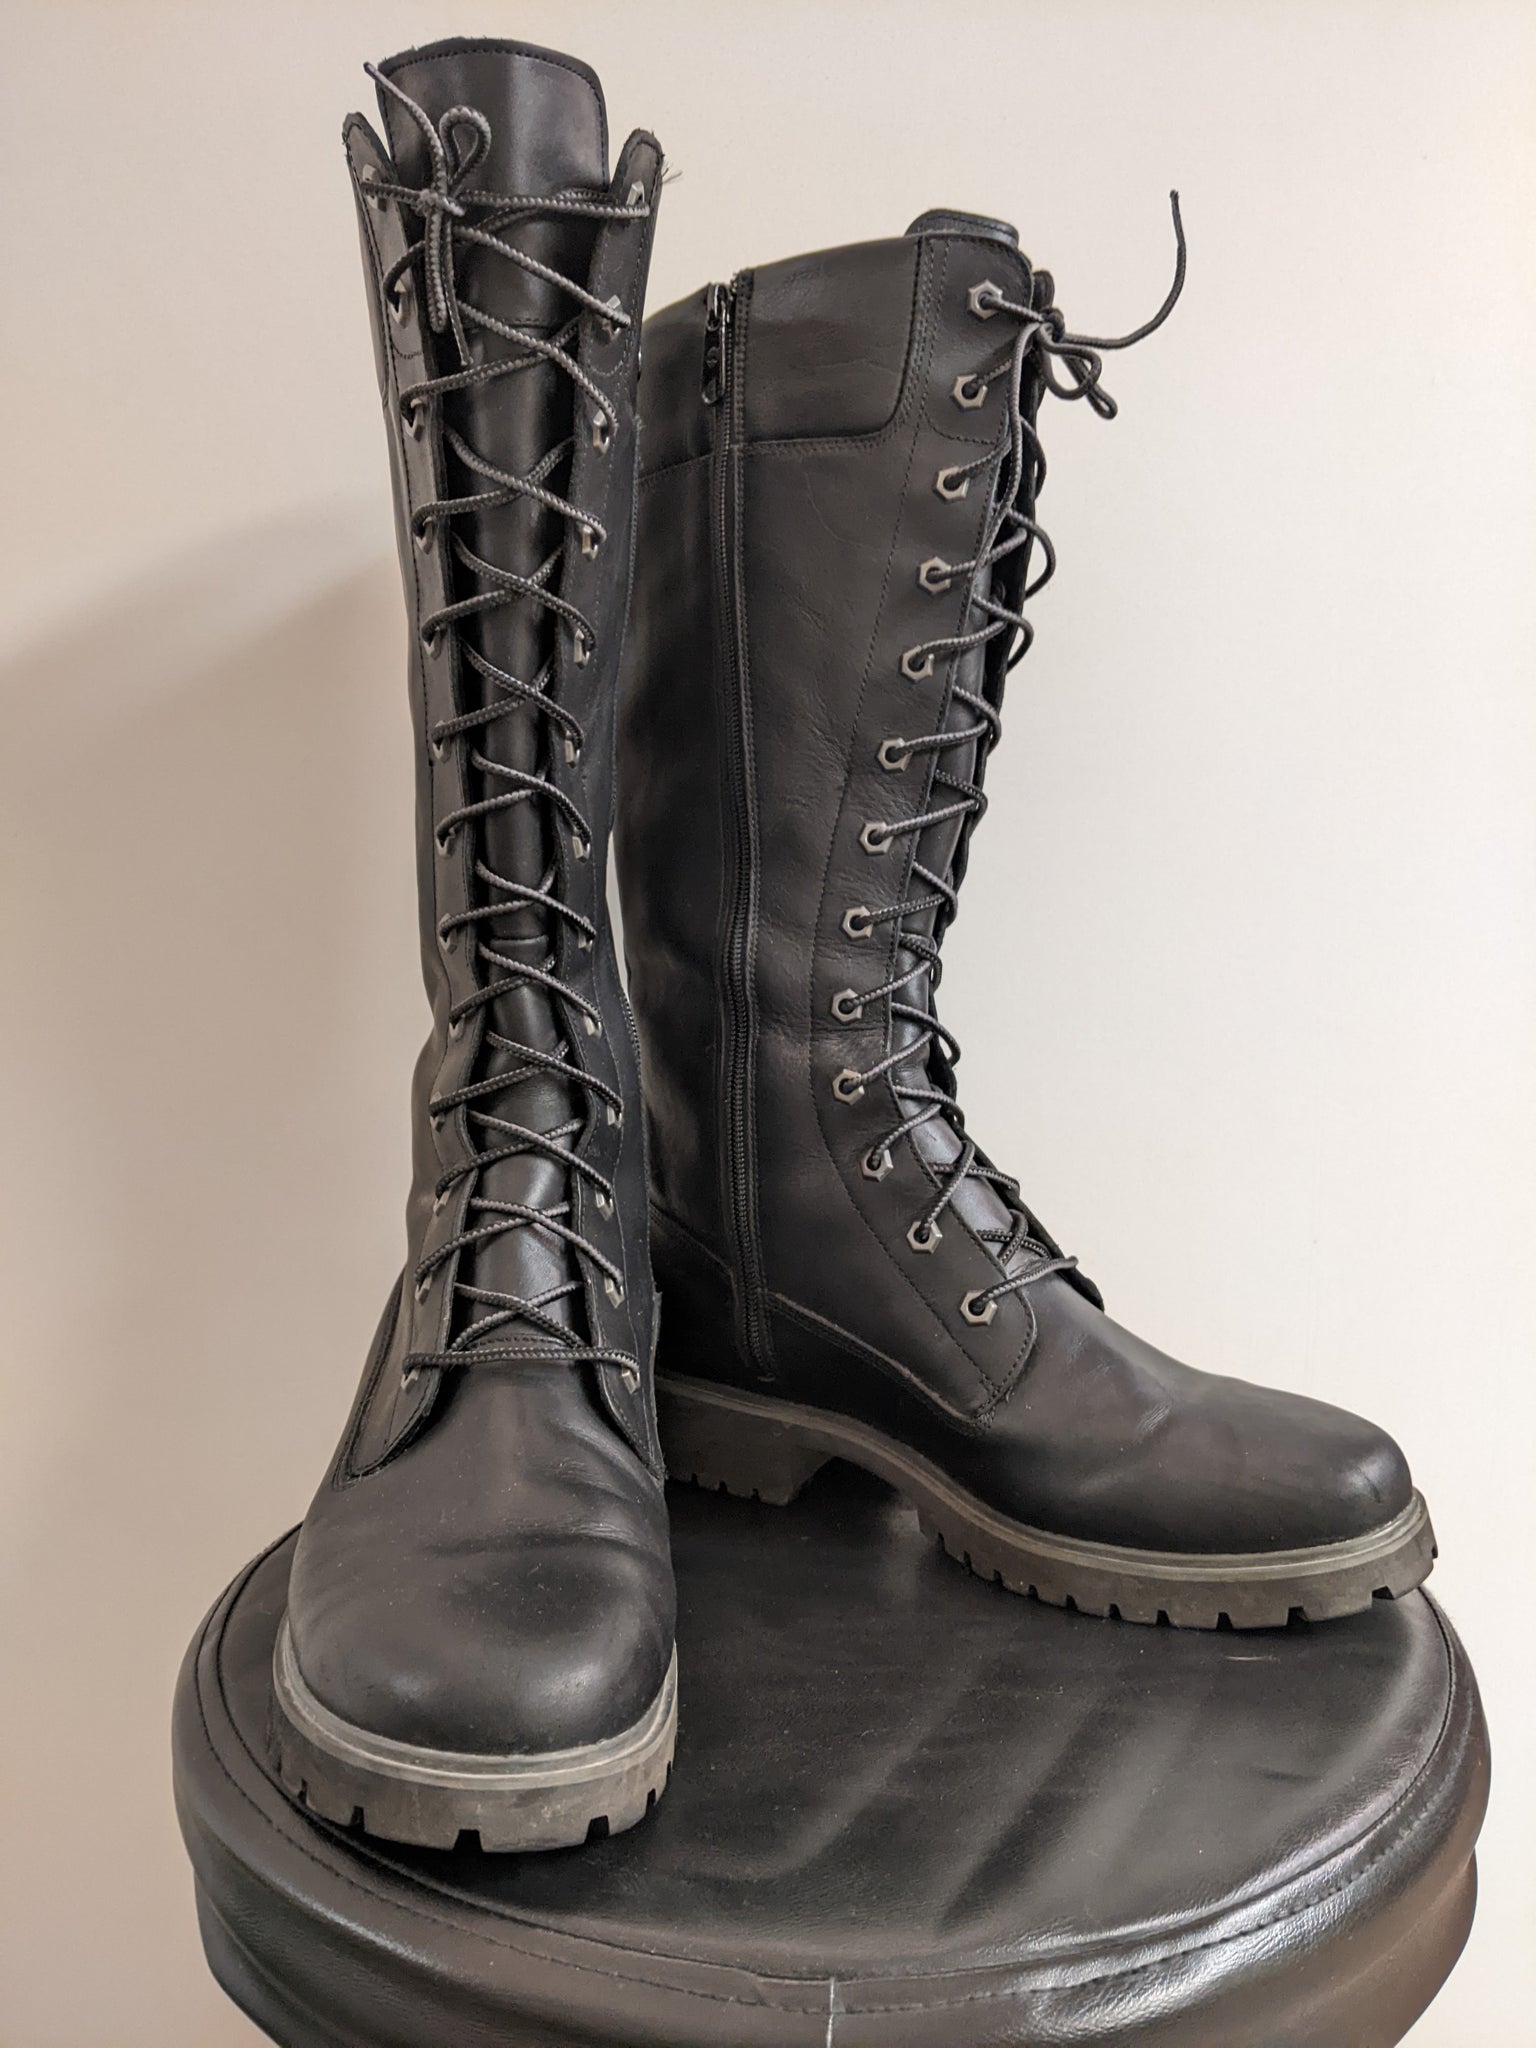 Knee-High Black Leather Timberland Boots - W10